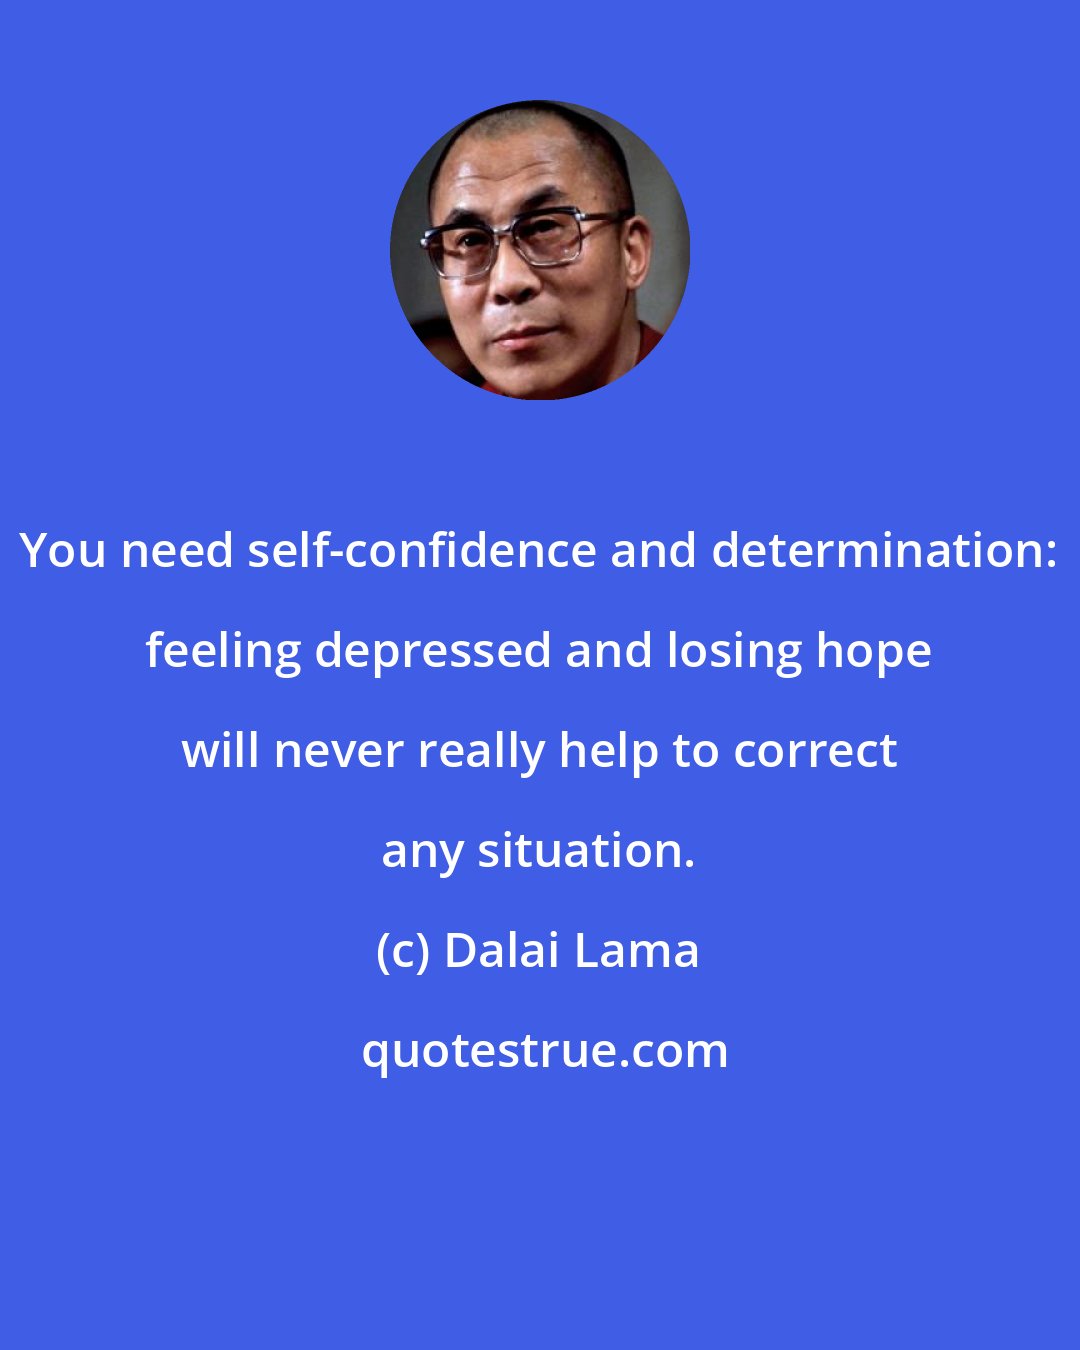 Dalai Lama: You need self-confidence and determination: feeling depressed and losing hope will never really help to correct any situation.